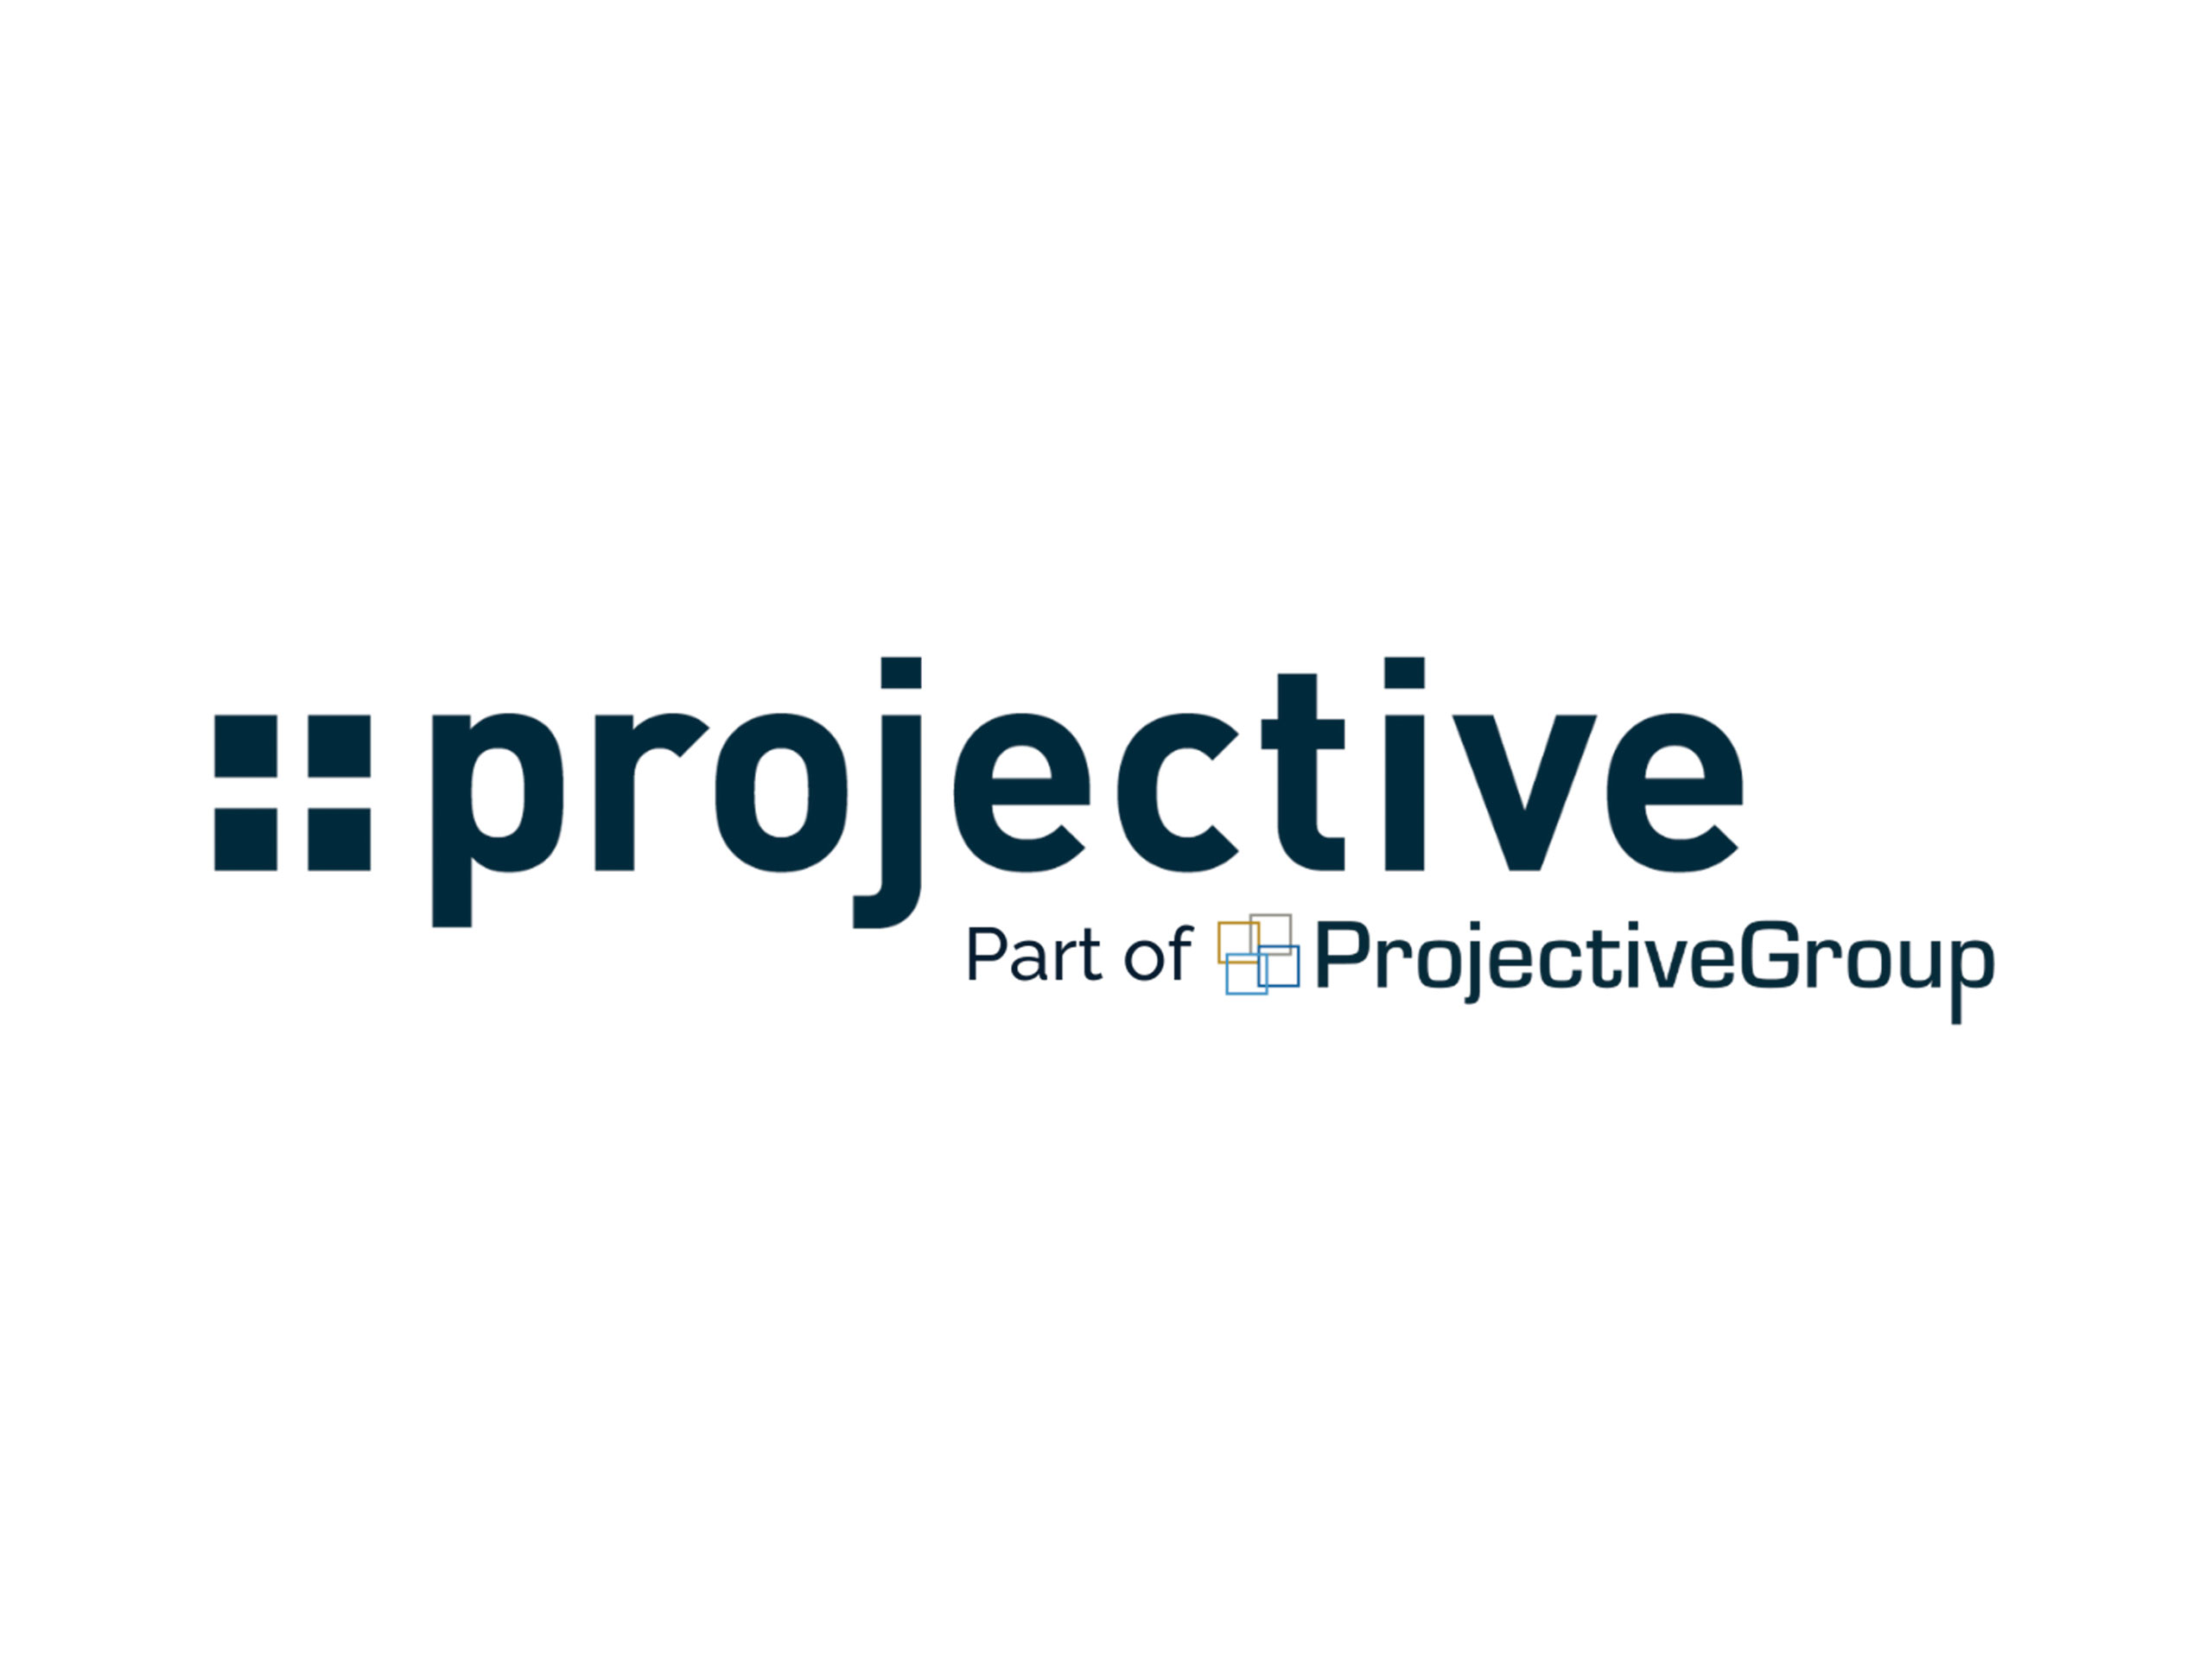 Quorum assists Projective with the cross-border acquisition of Mastermind Consulting